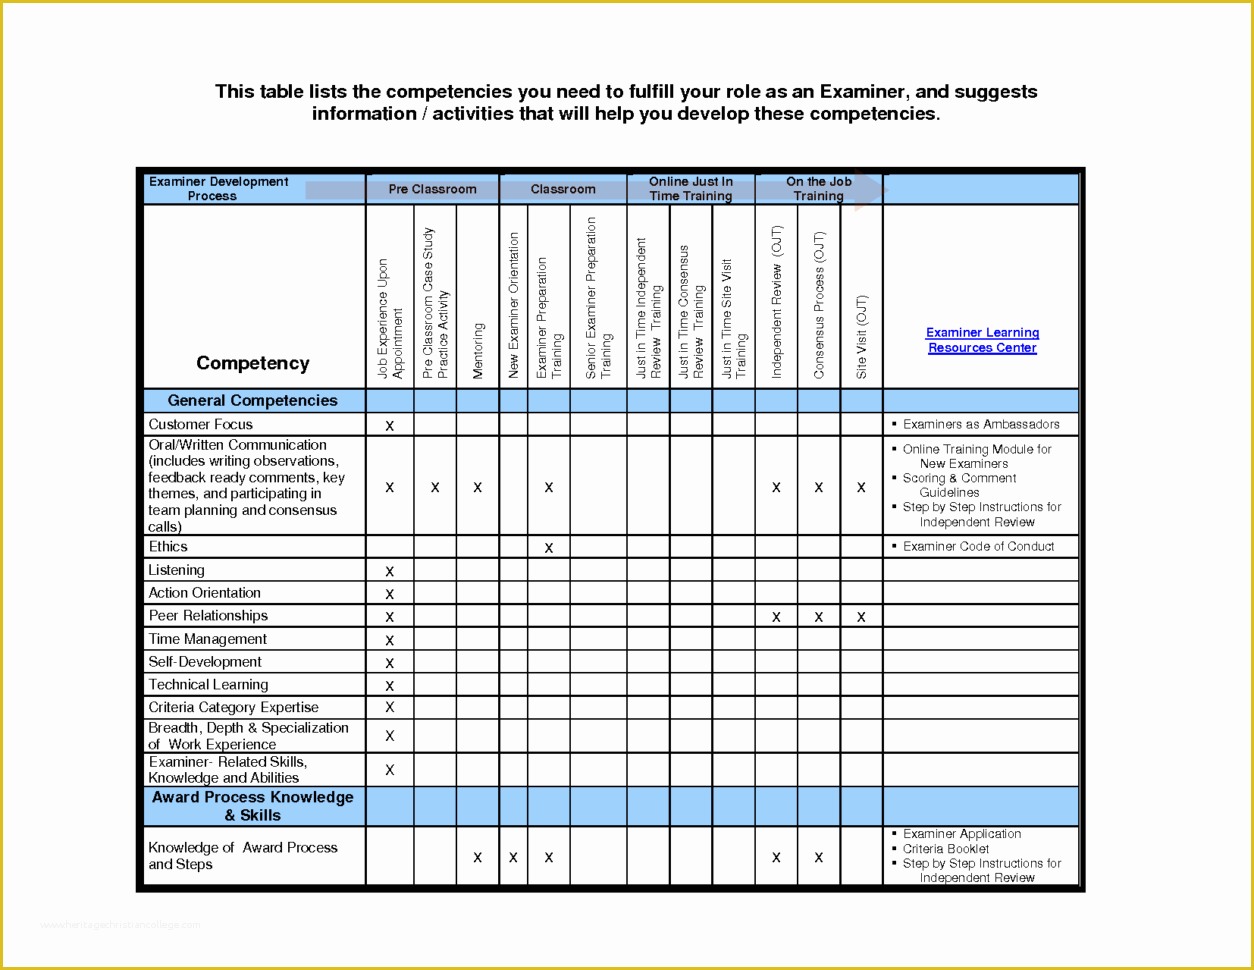 Free Employee Training Matrix Template Excel Of Employee Monthly attendance Sheet Template Excel Training